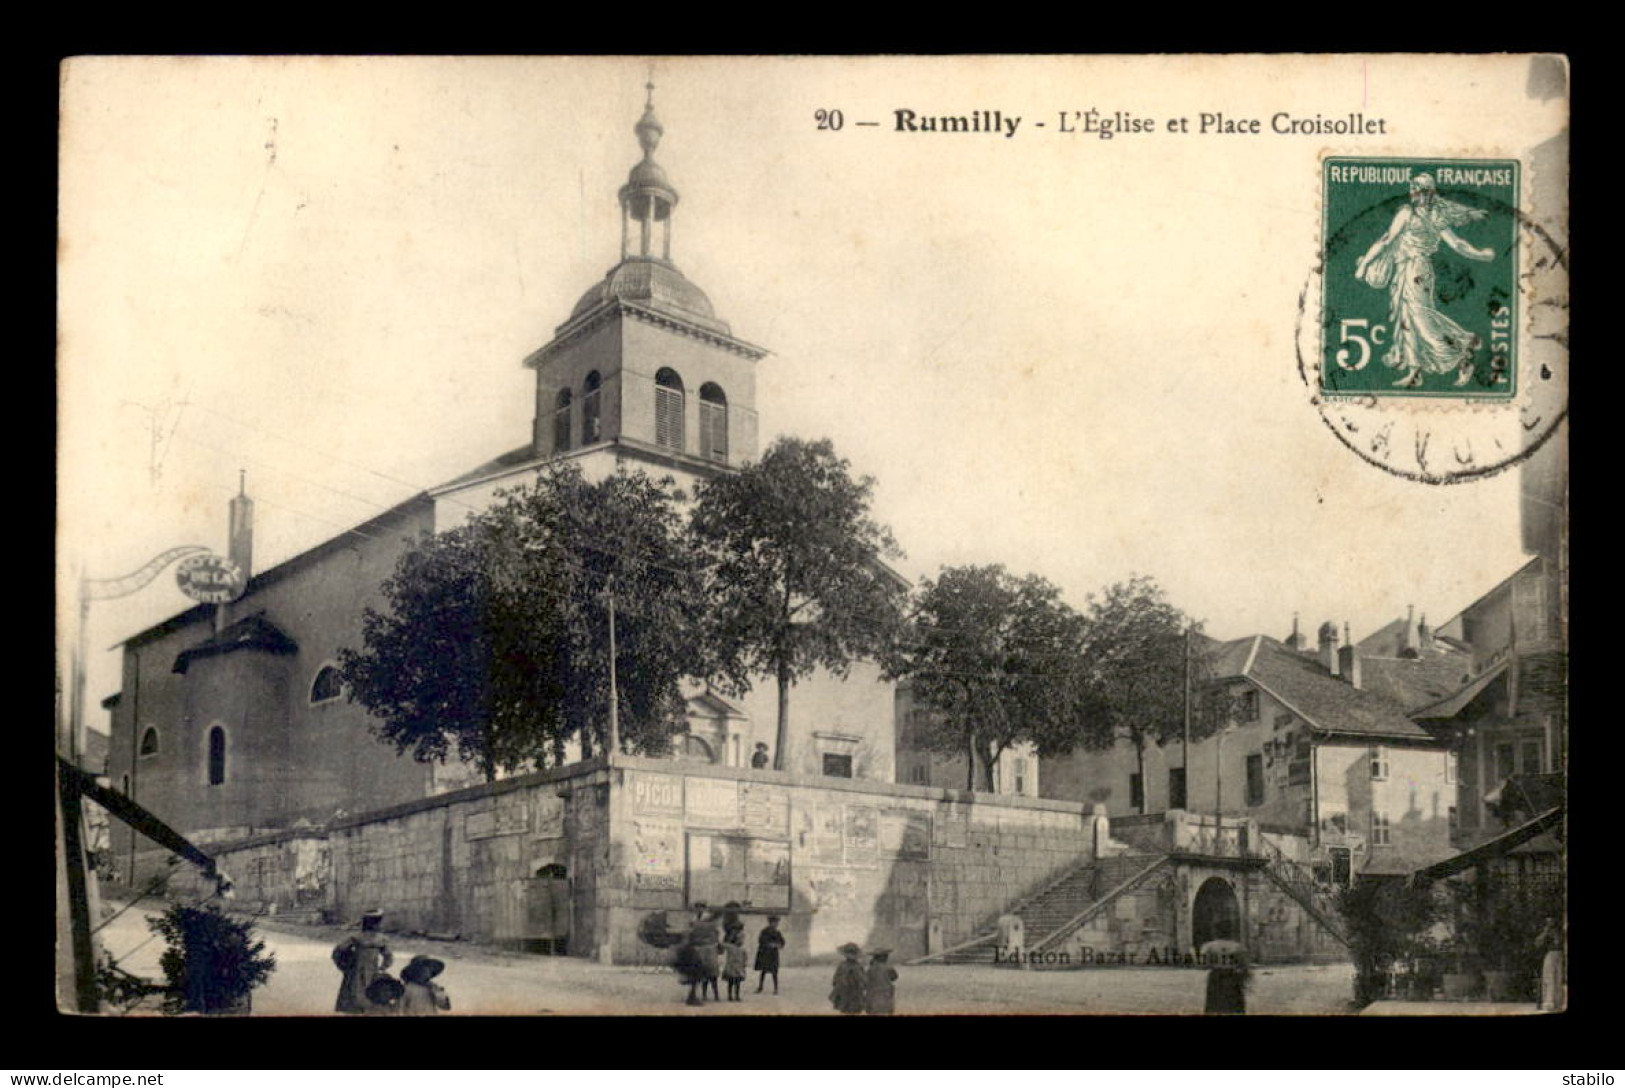 74 - RUMILLY - L'EGLISE PLACE CROISOLLET - Rumilly